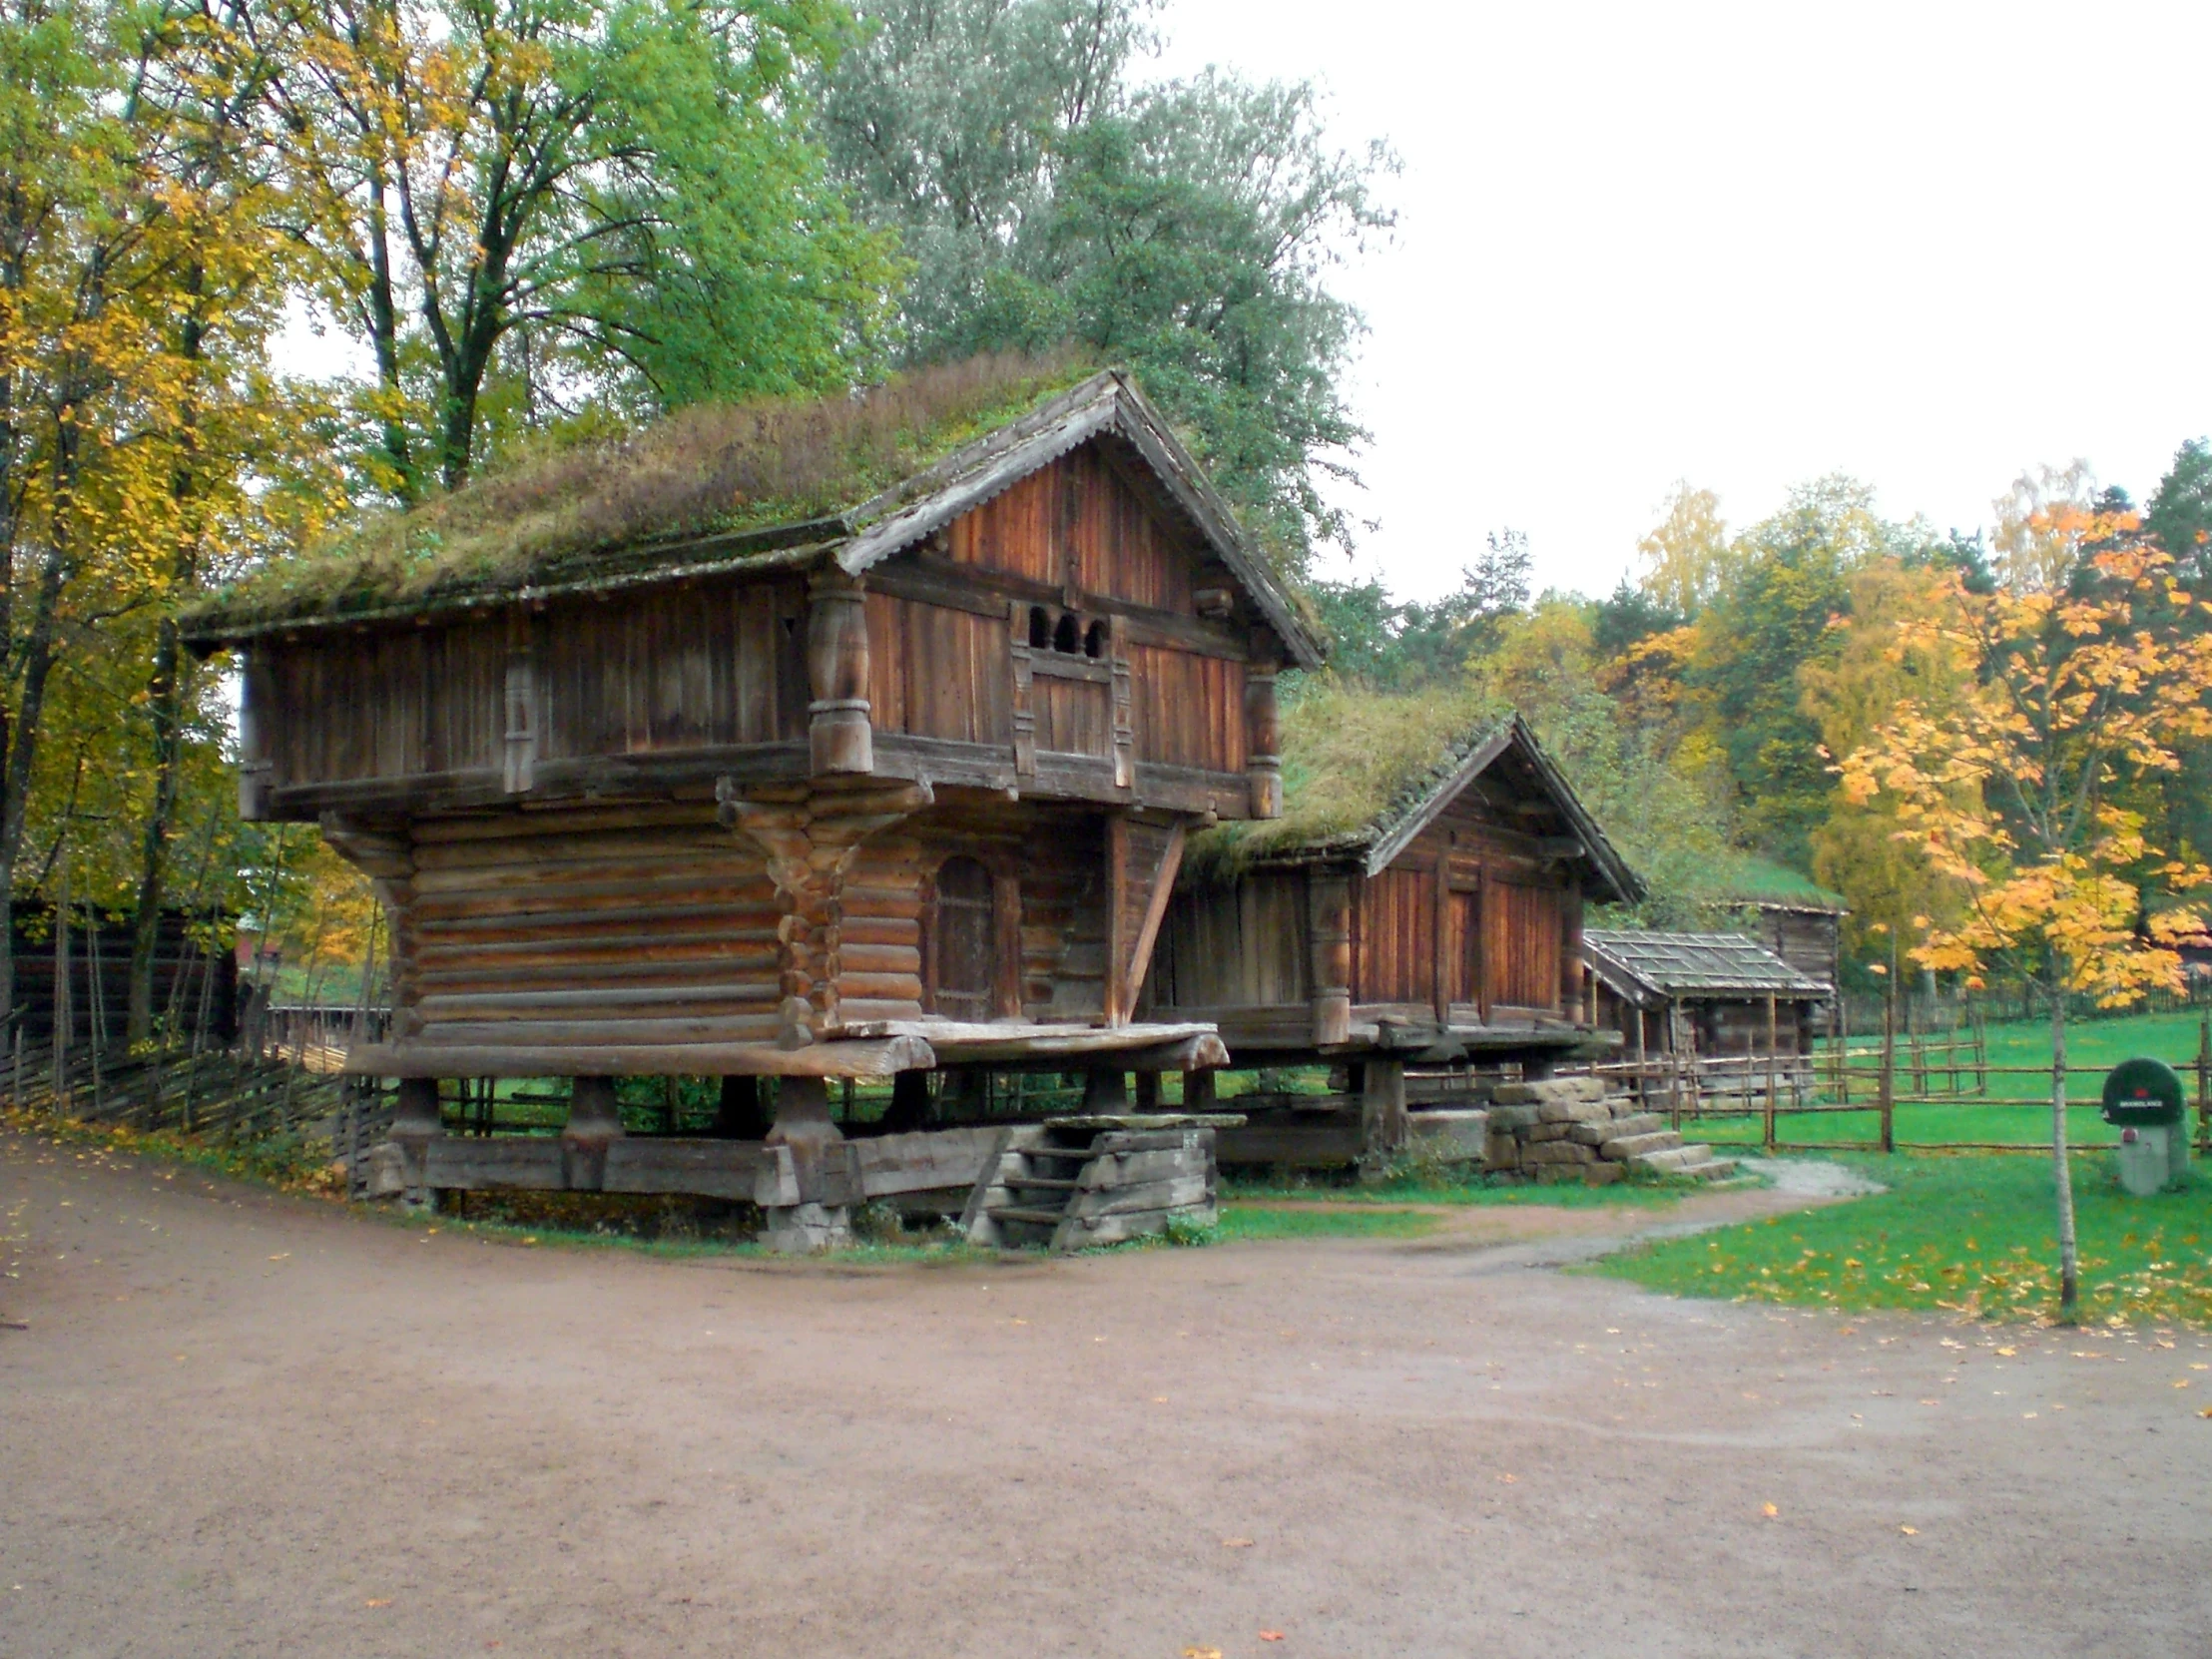 old wooden log buildings are displayed along a path